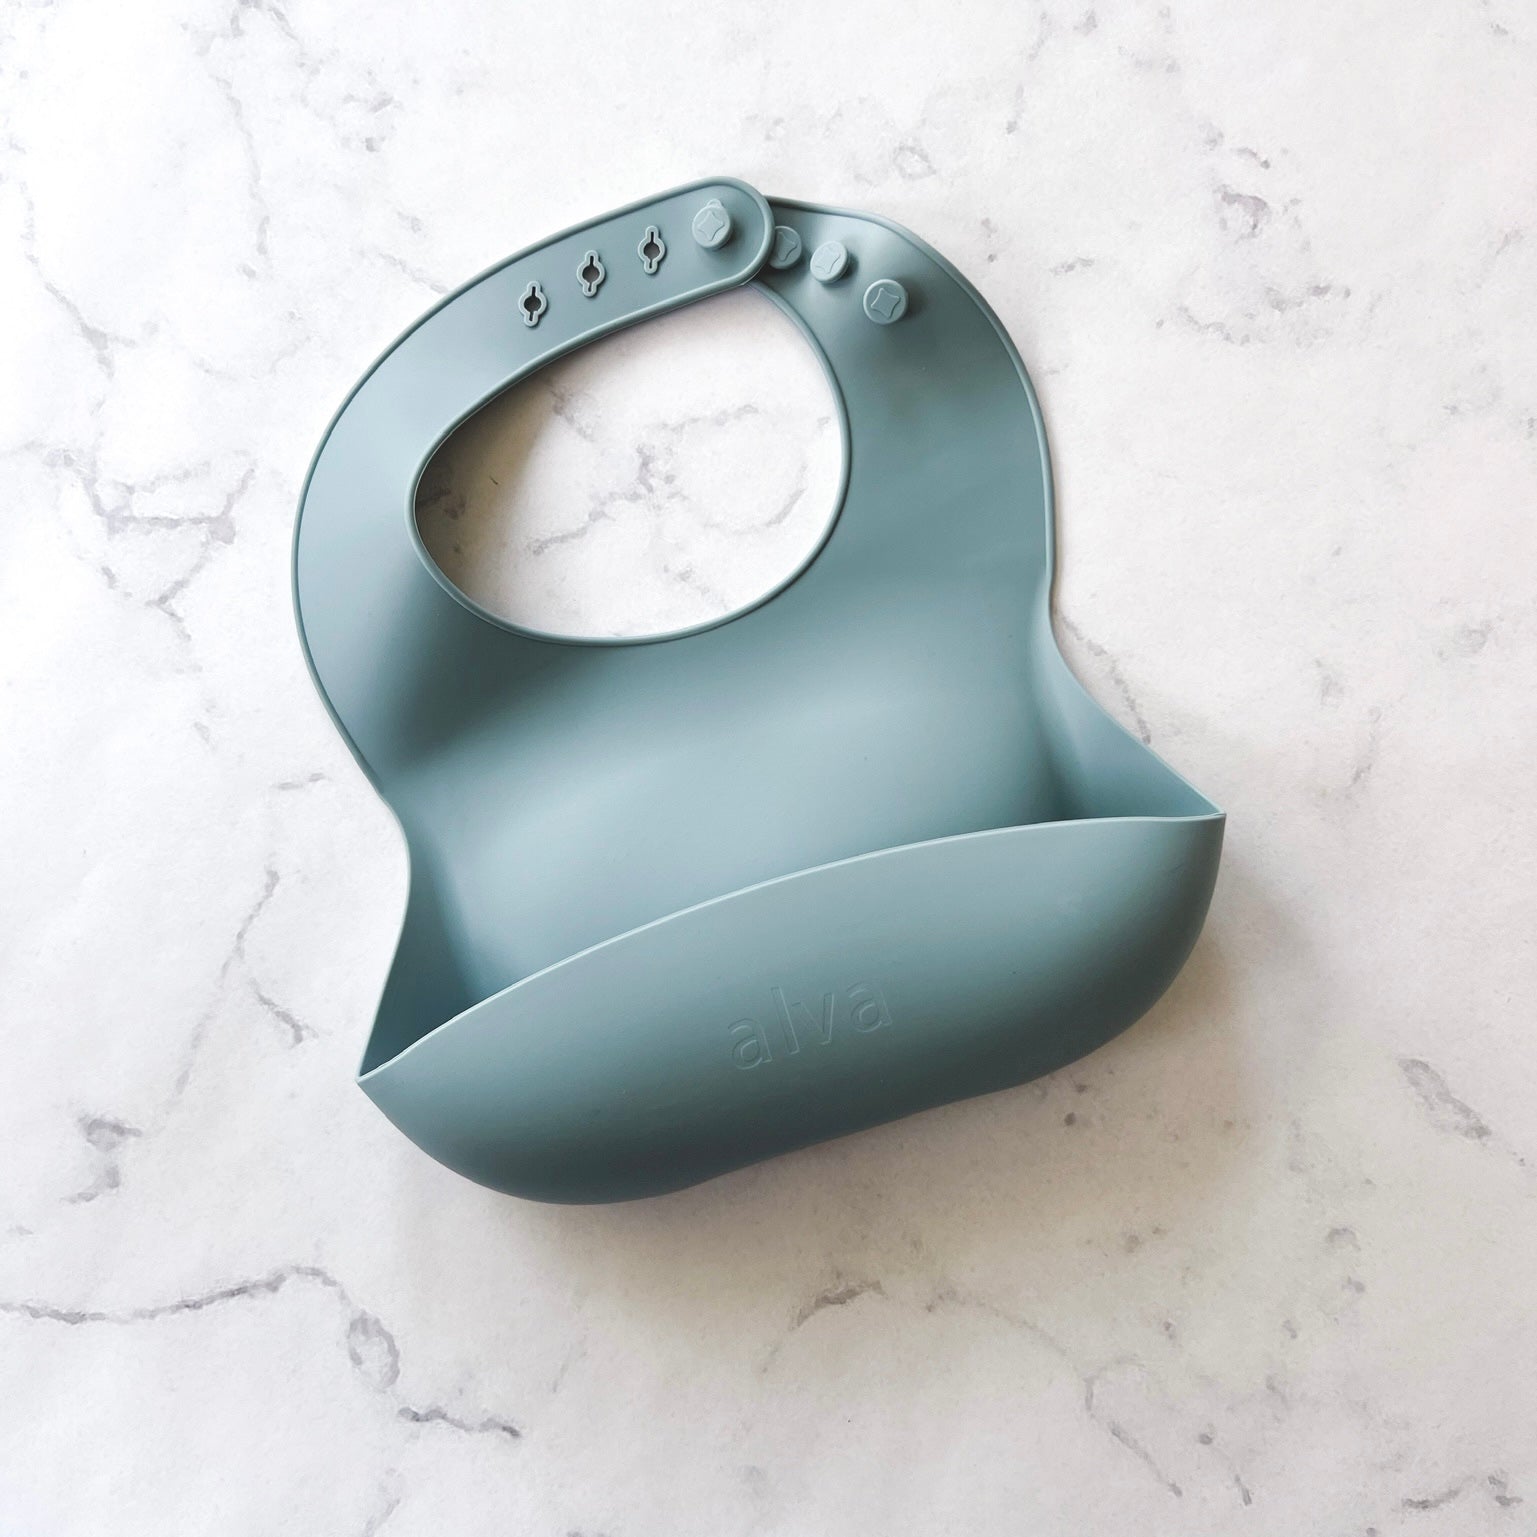 Alva blue silicone baby bib against a white marbled table